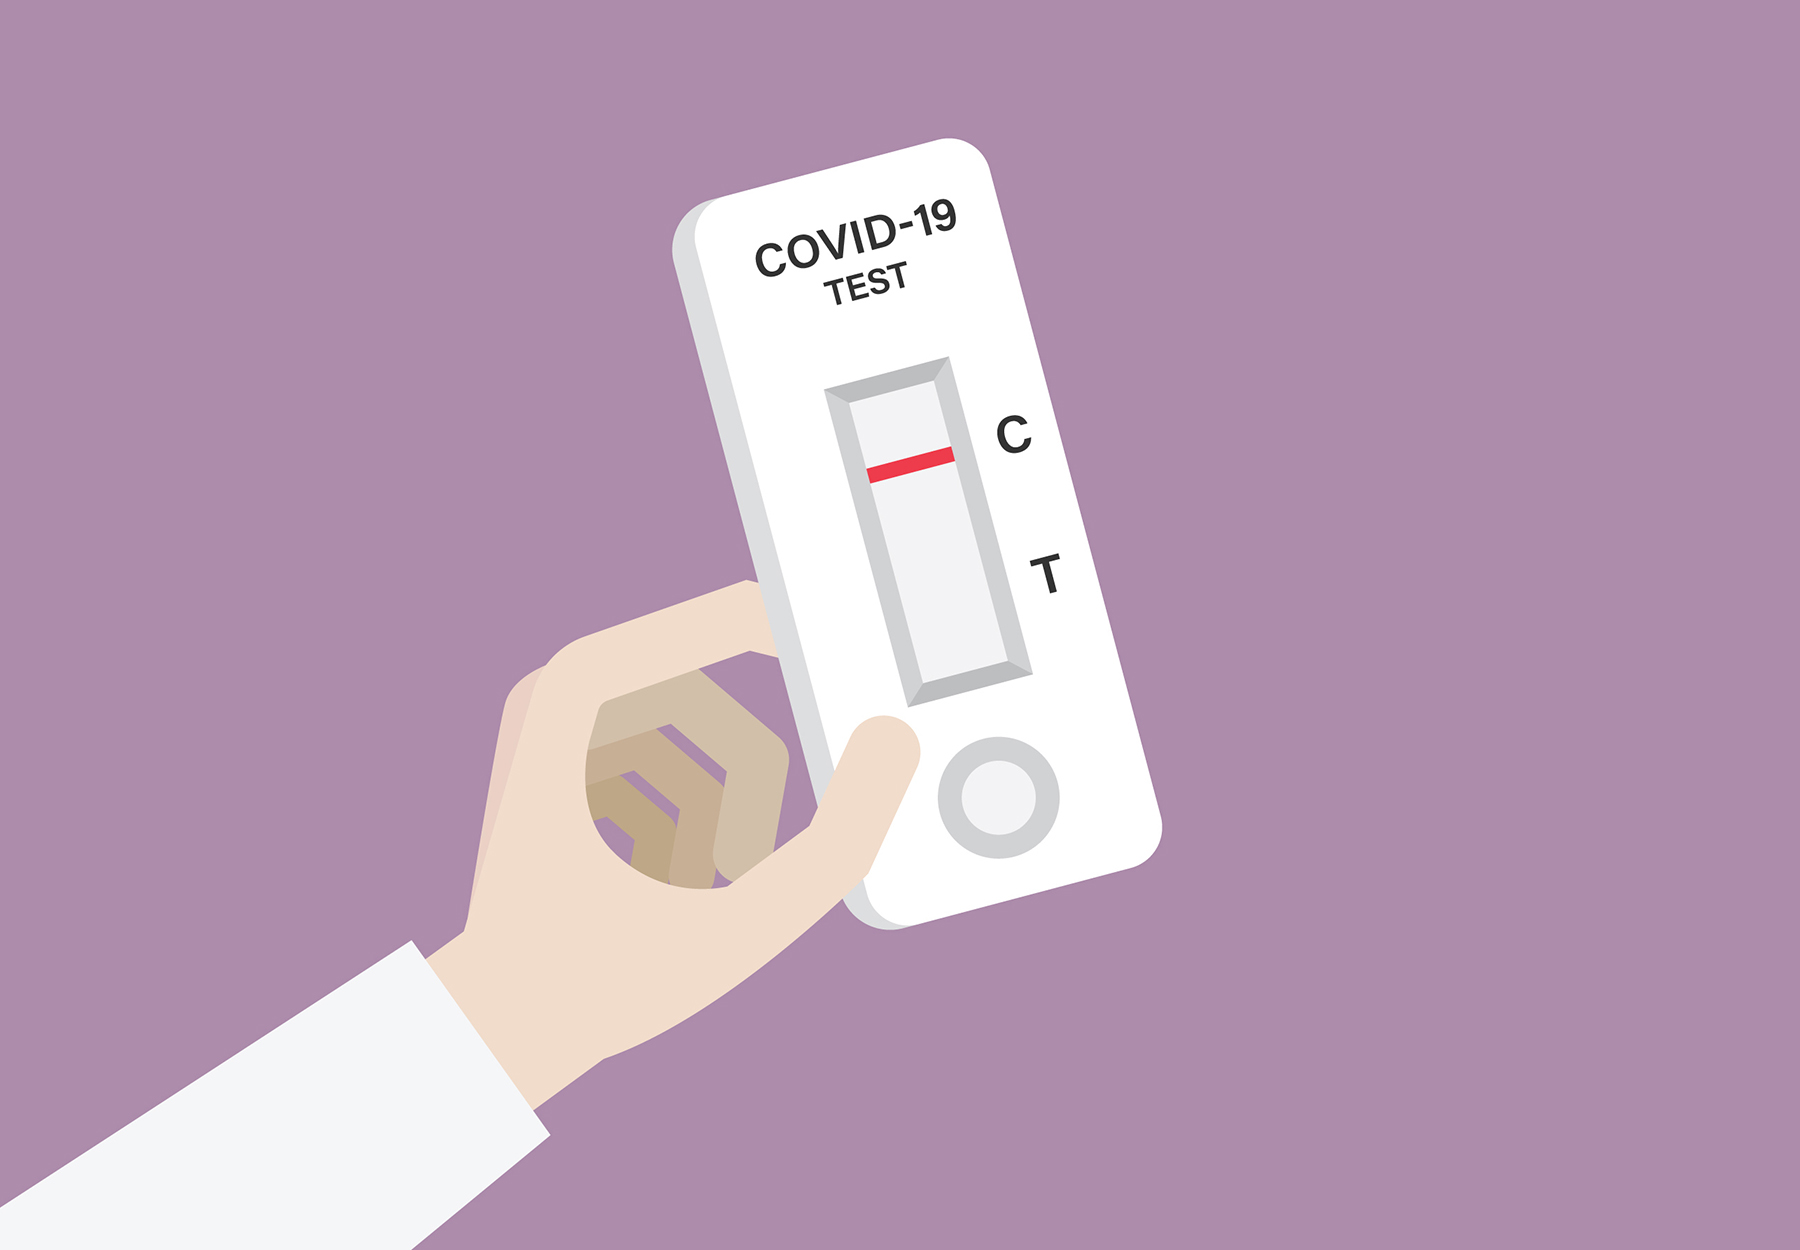 Hand holding a COVID-19 rapid test with a negative result stock illustration